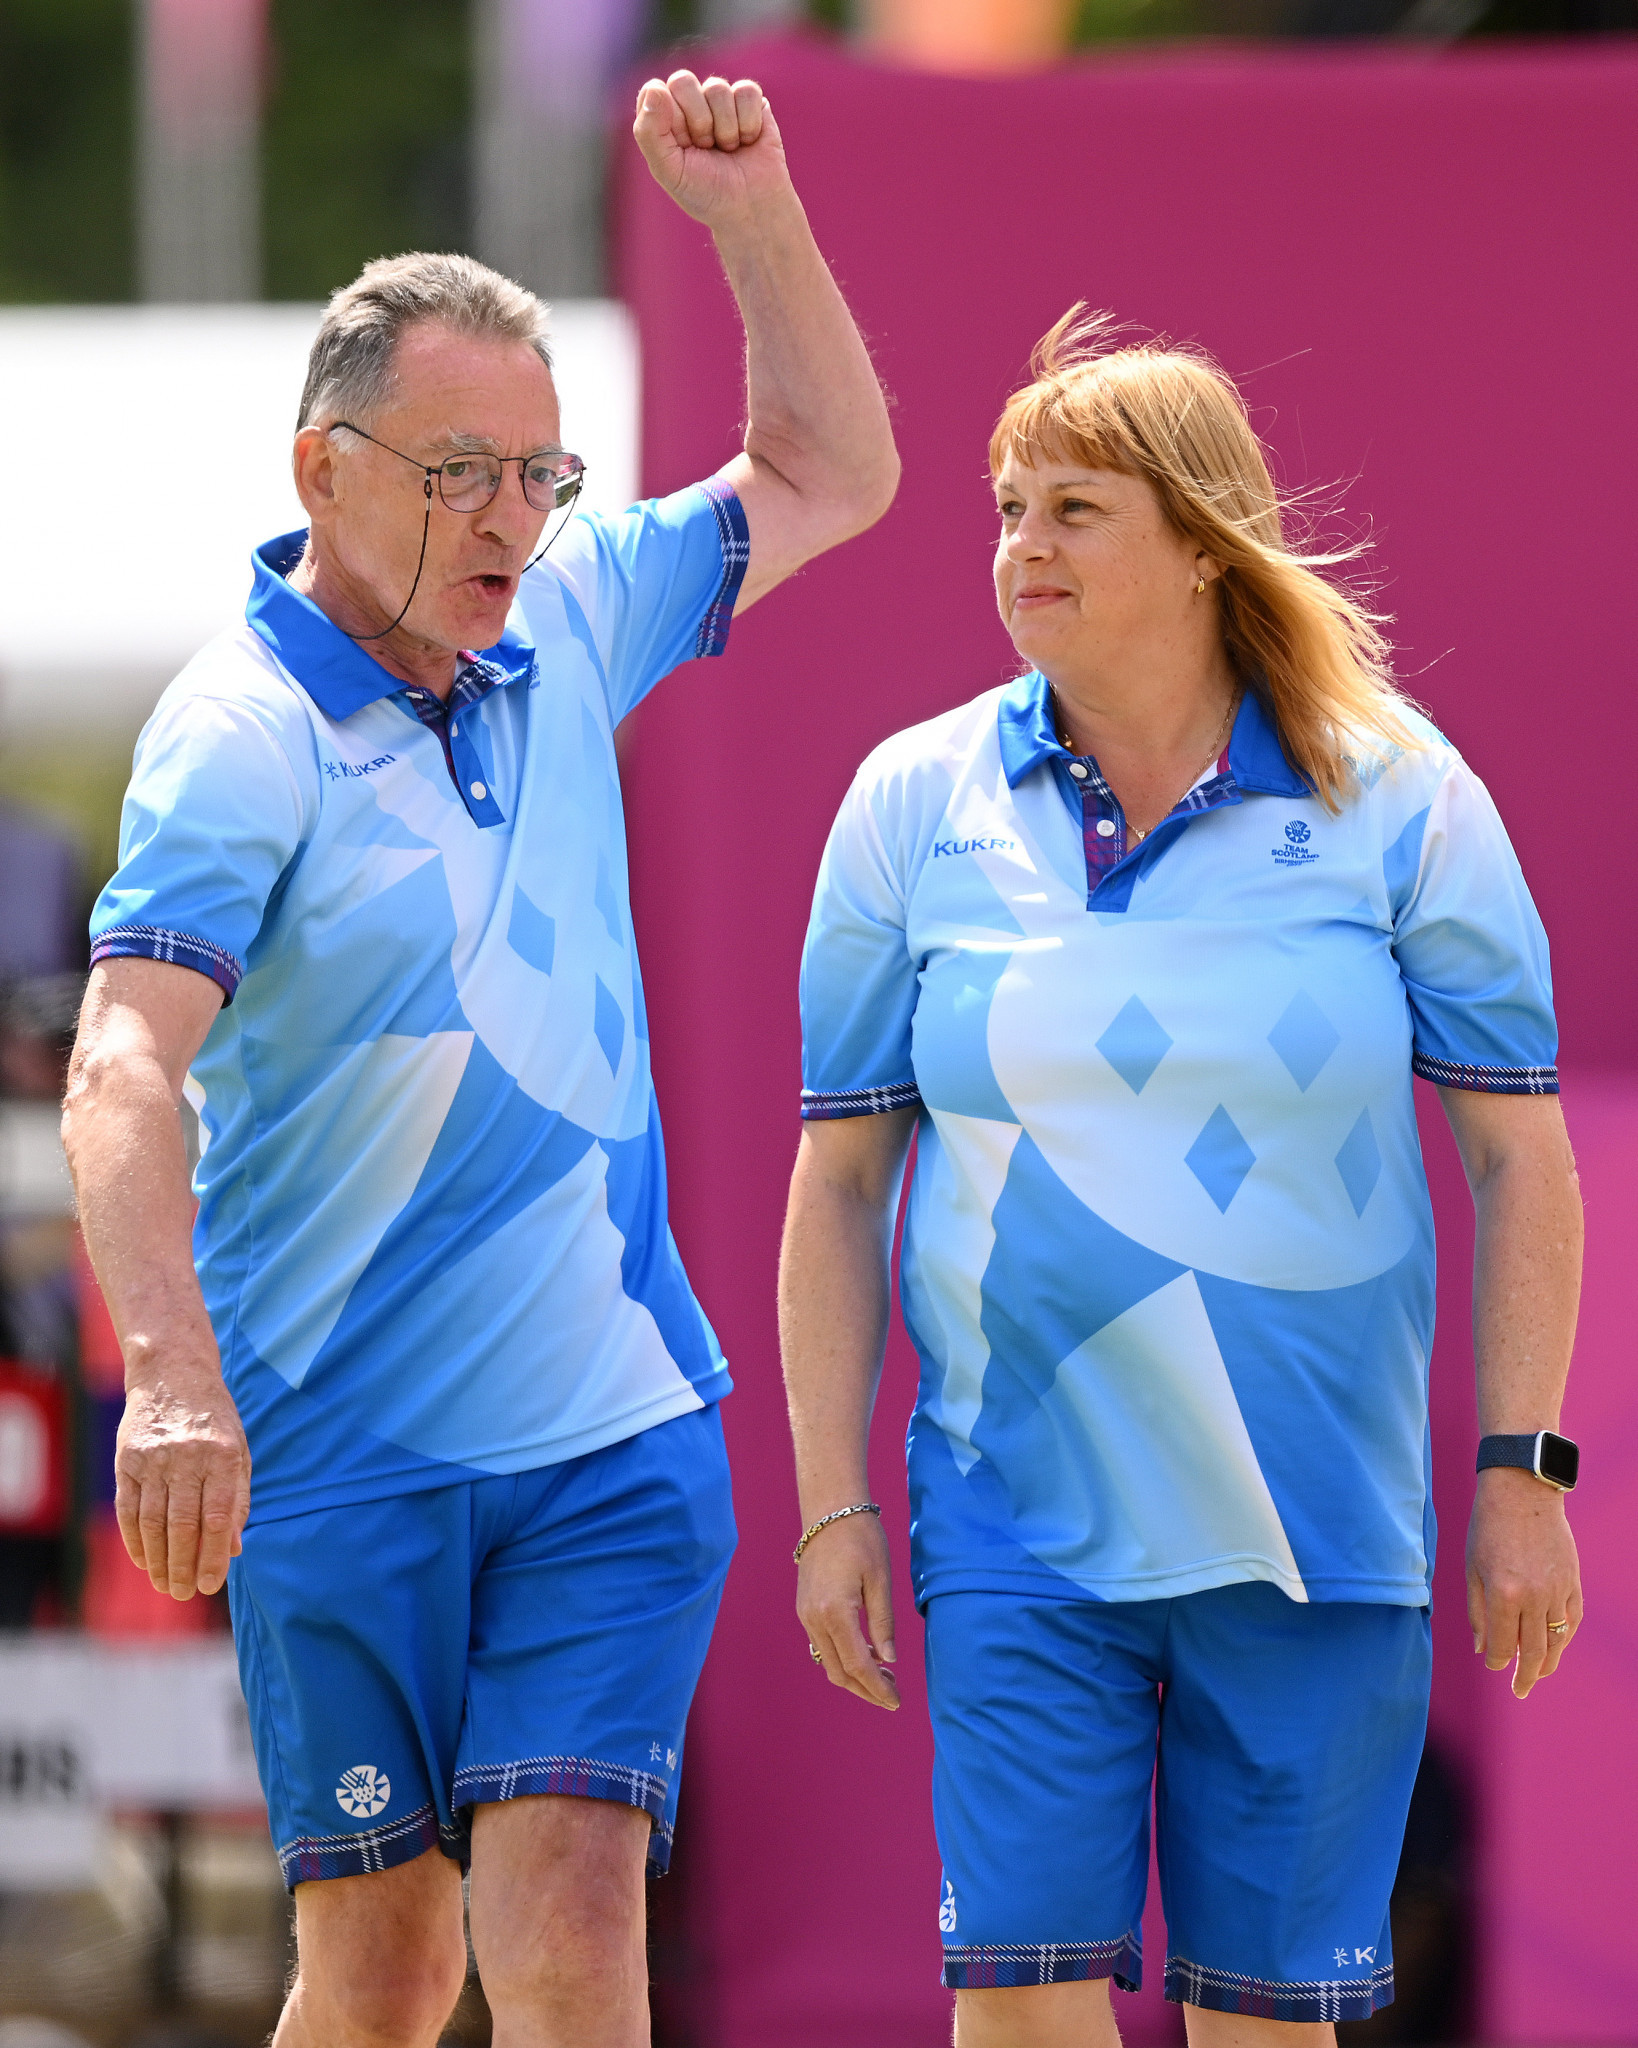 Scottish Para bowler Miller, 75, becomes oldest Commonwealth Games champion